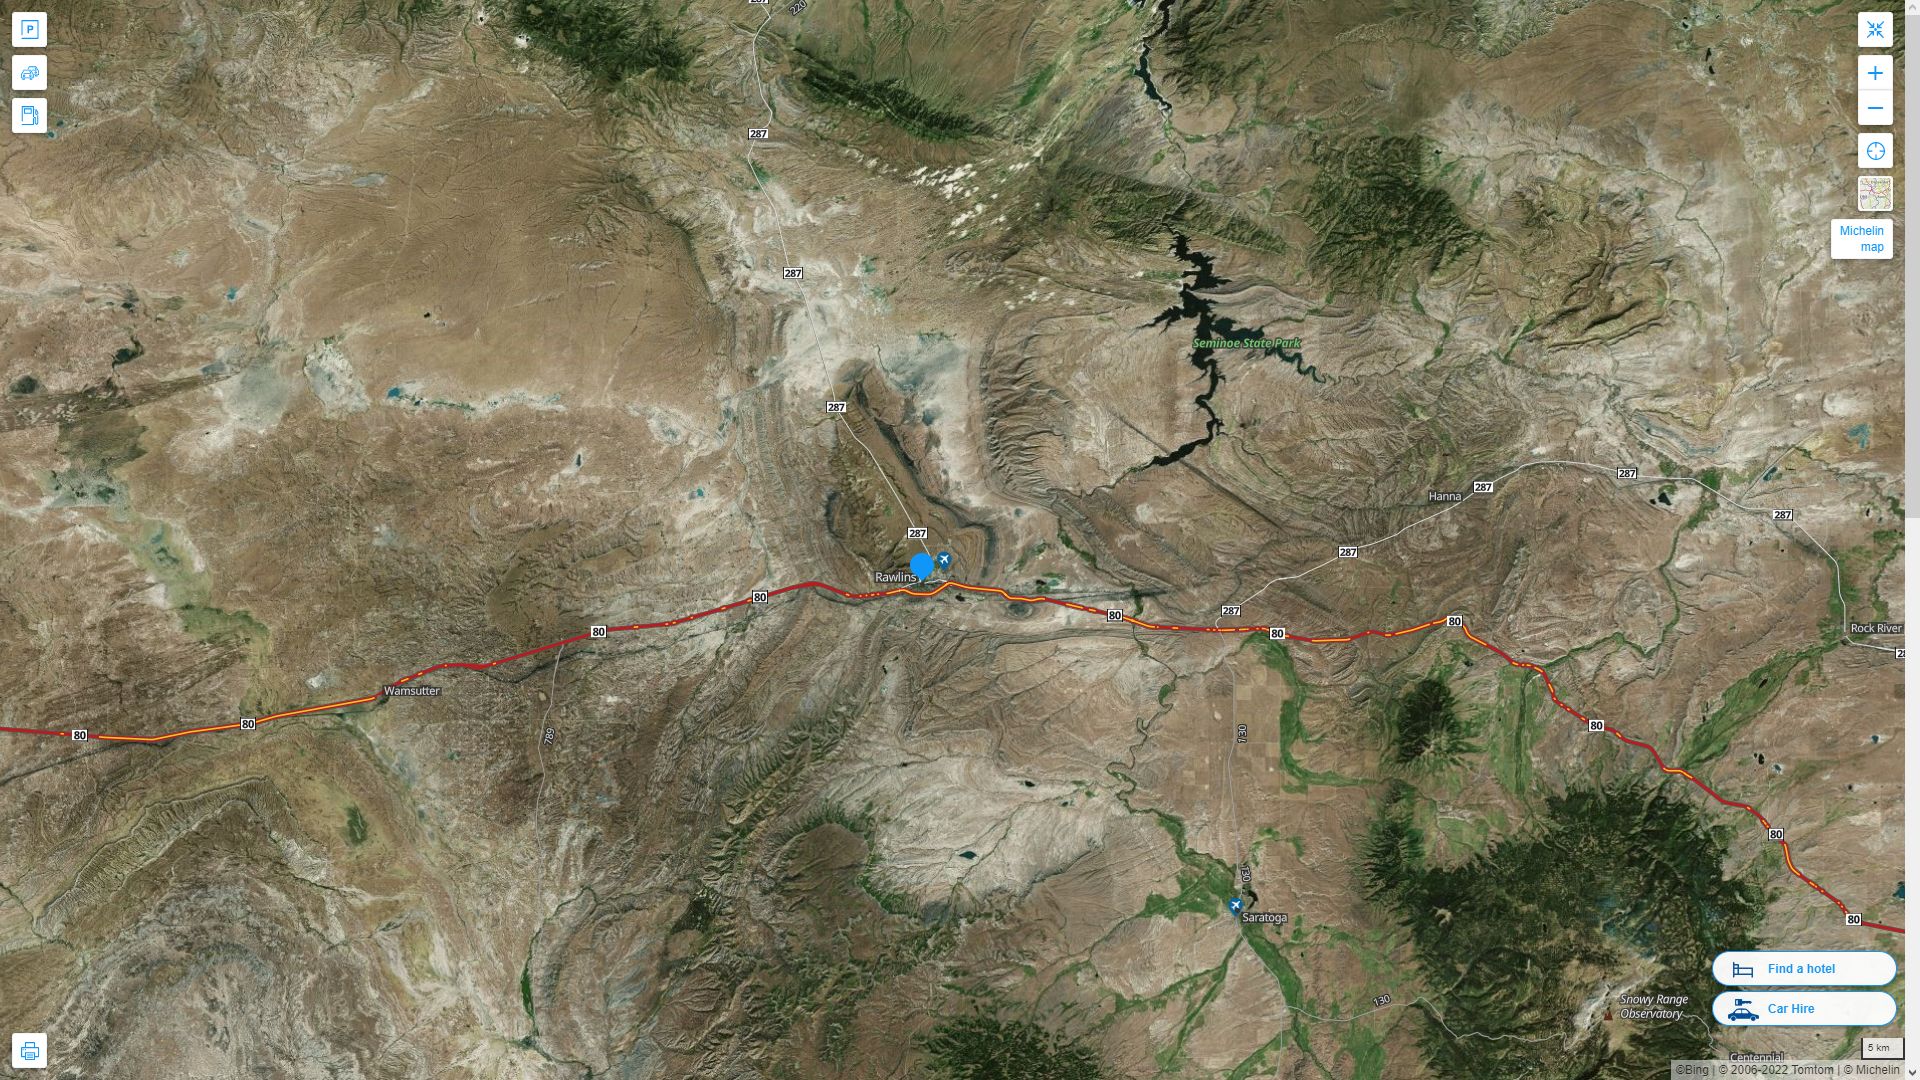 Rawlins Wyoming Highway and Road Map with Satellite View